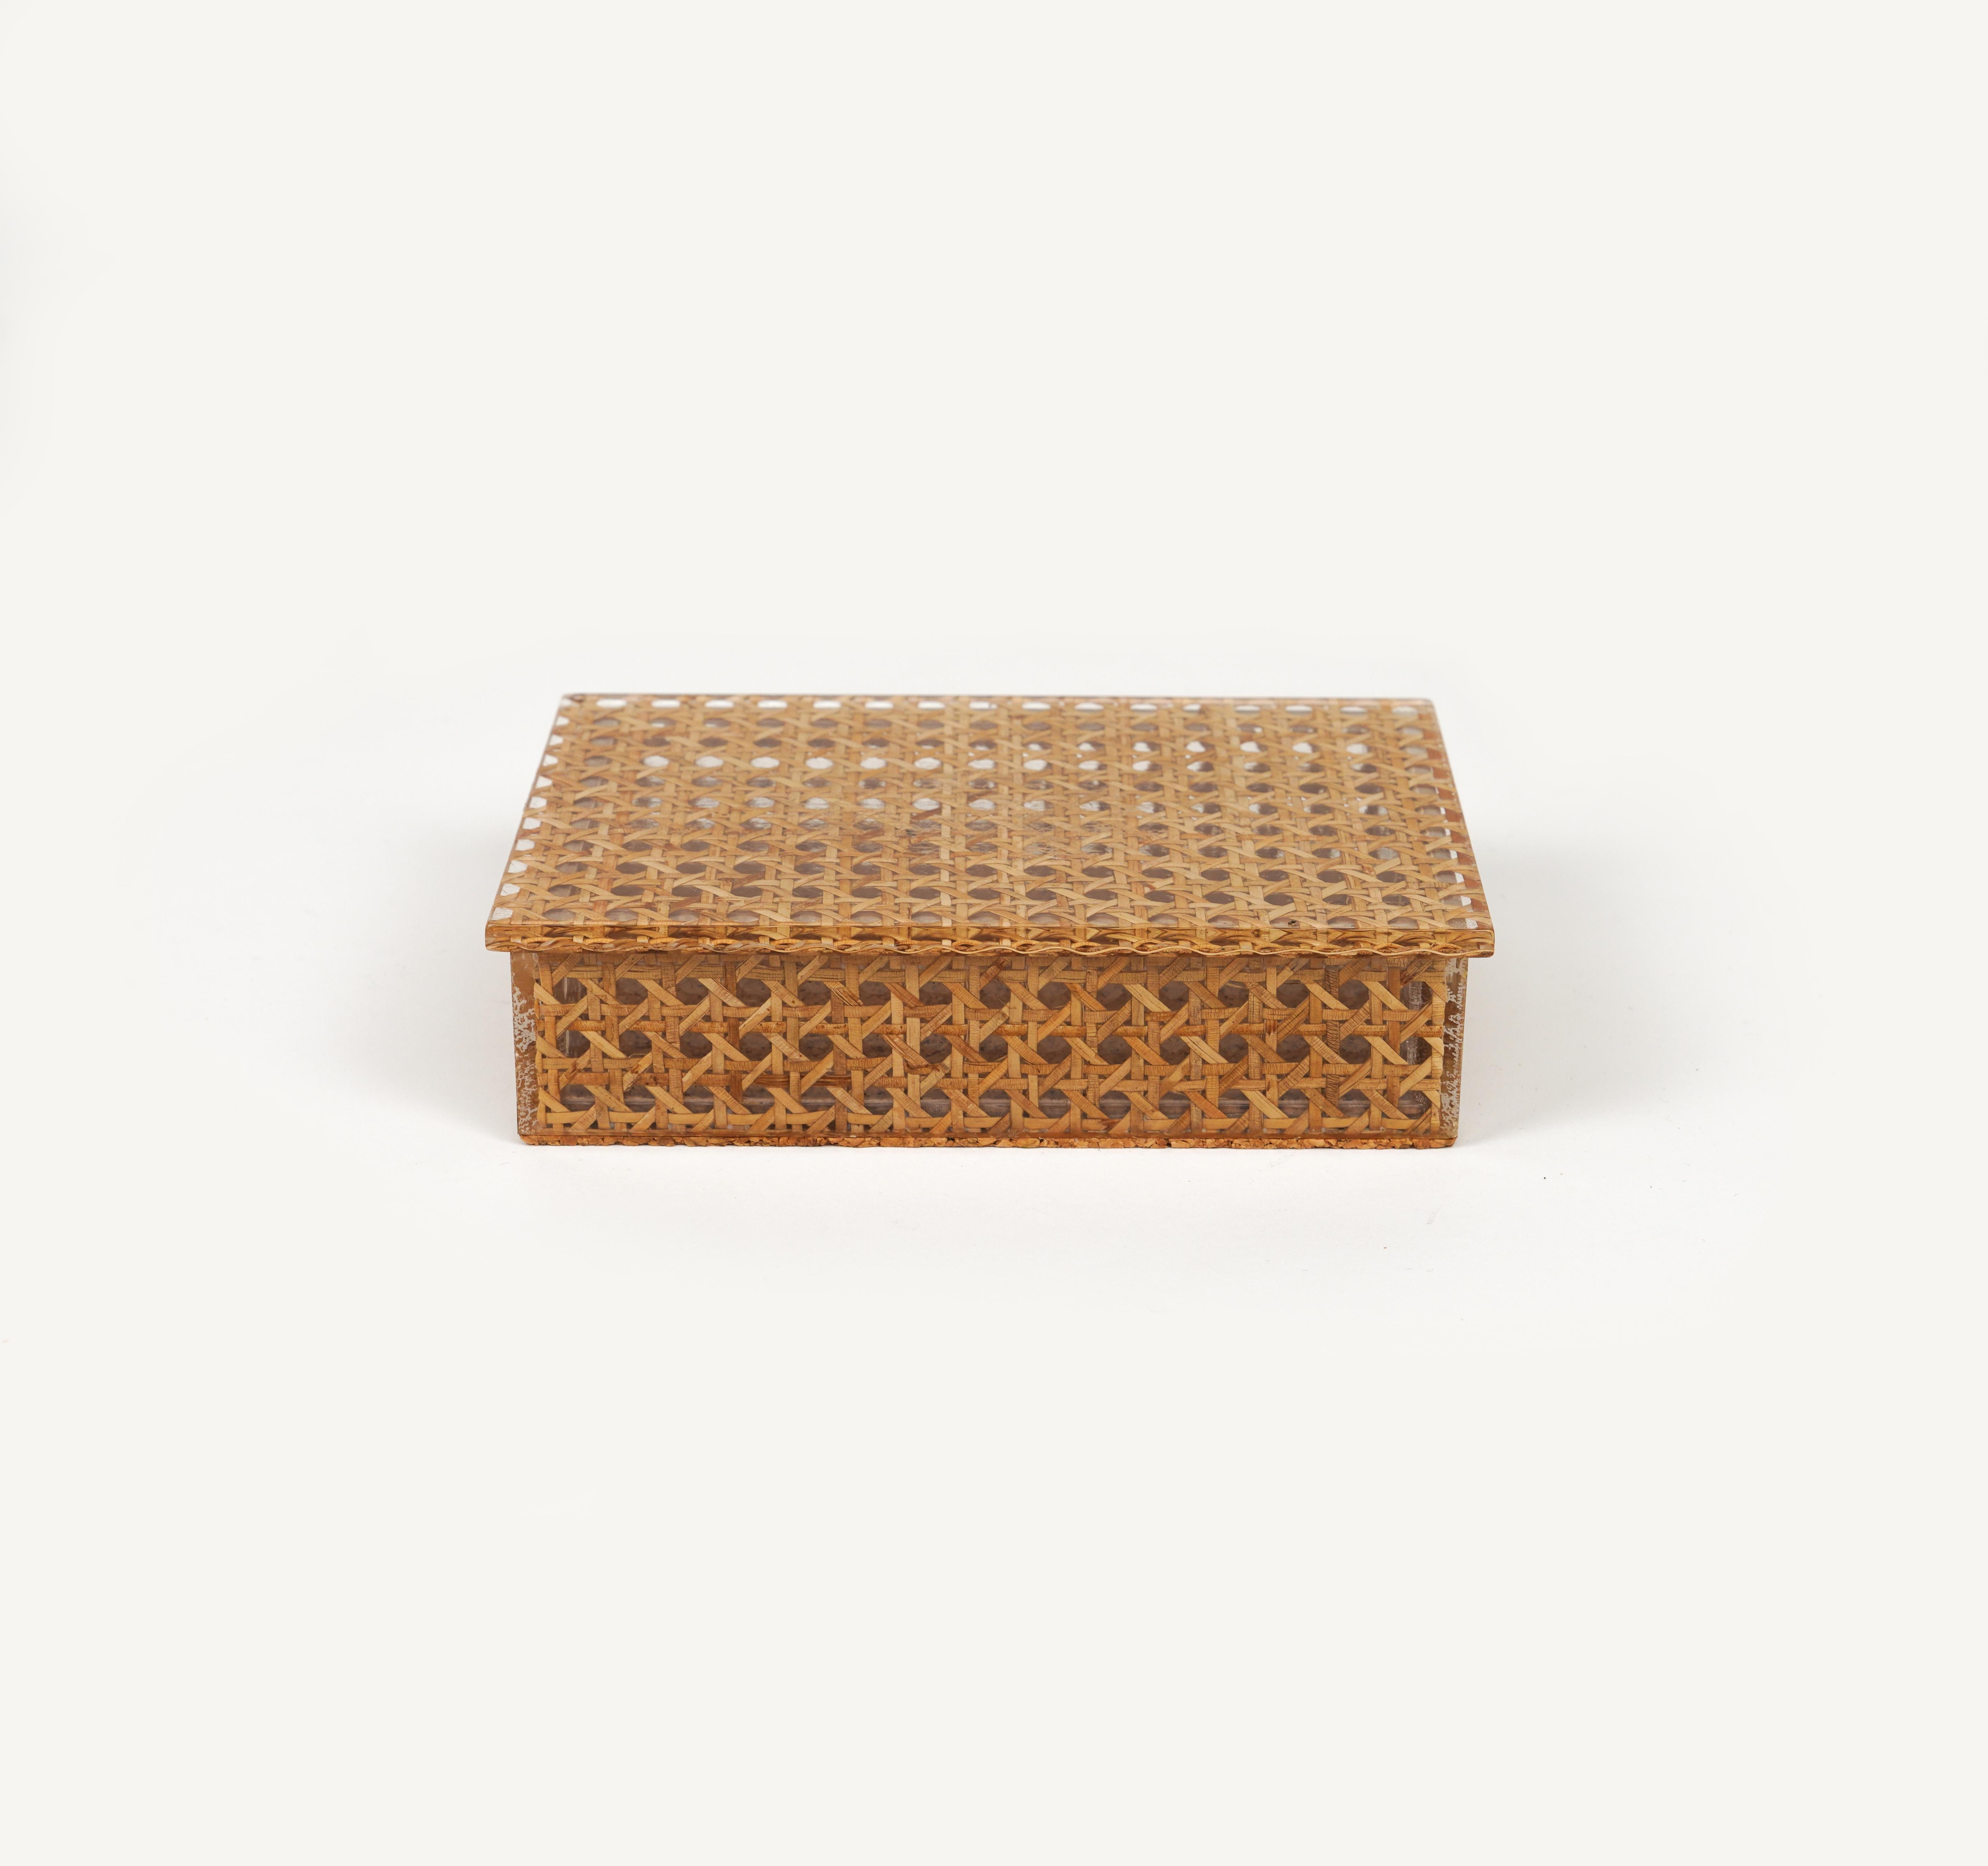 Midcentury Box in Rattan, Lucite and Cork Christian Dior Style, Italy 1970s For Sale 1